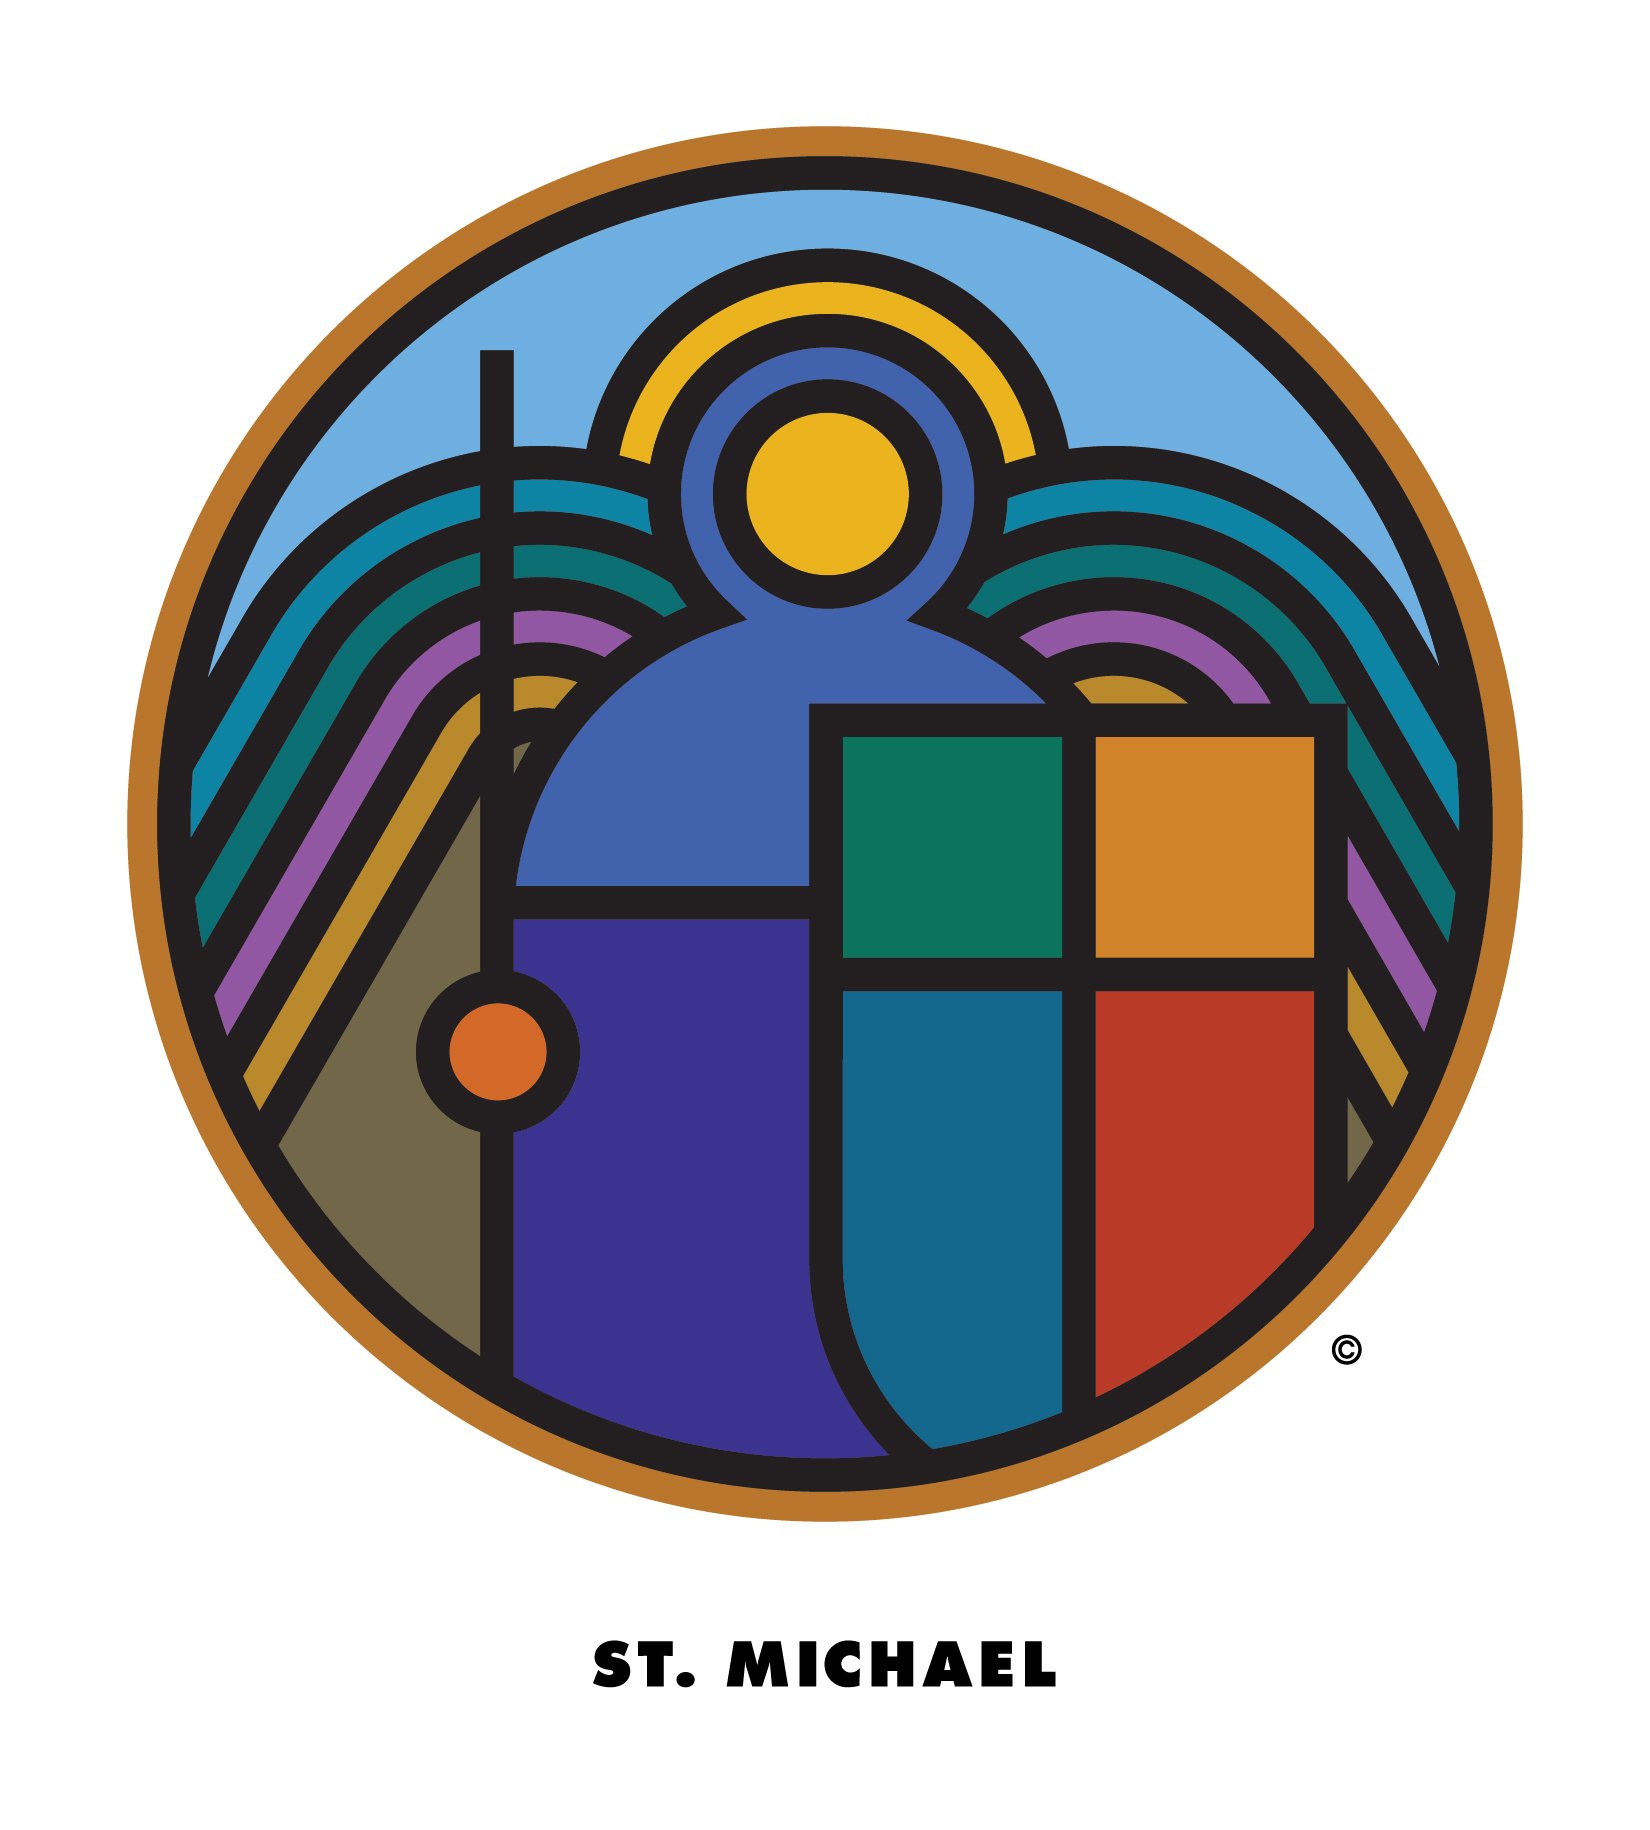  St. Michael stained glass prototype  Design creative by Chuck Mitchell  © Chuck Mitchell  All rights reserved. 